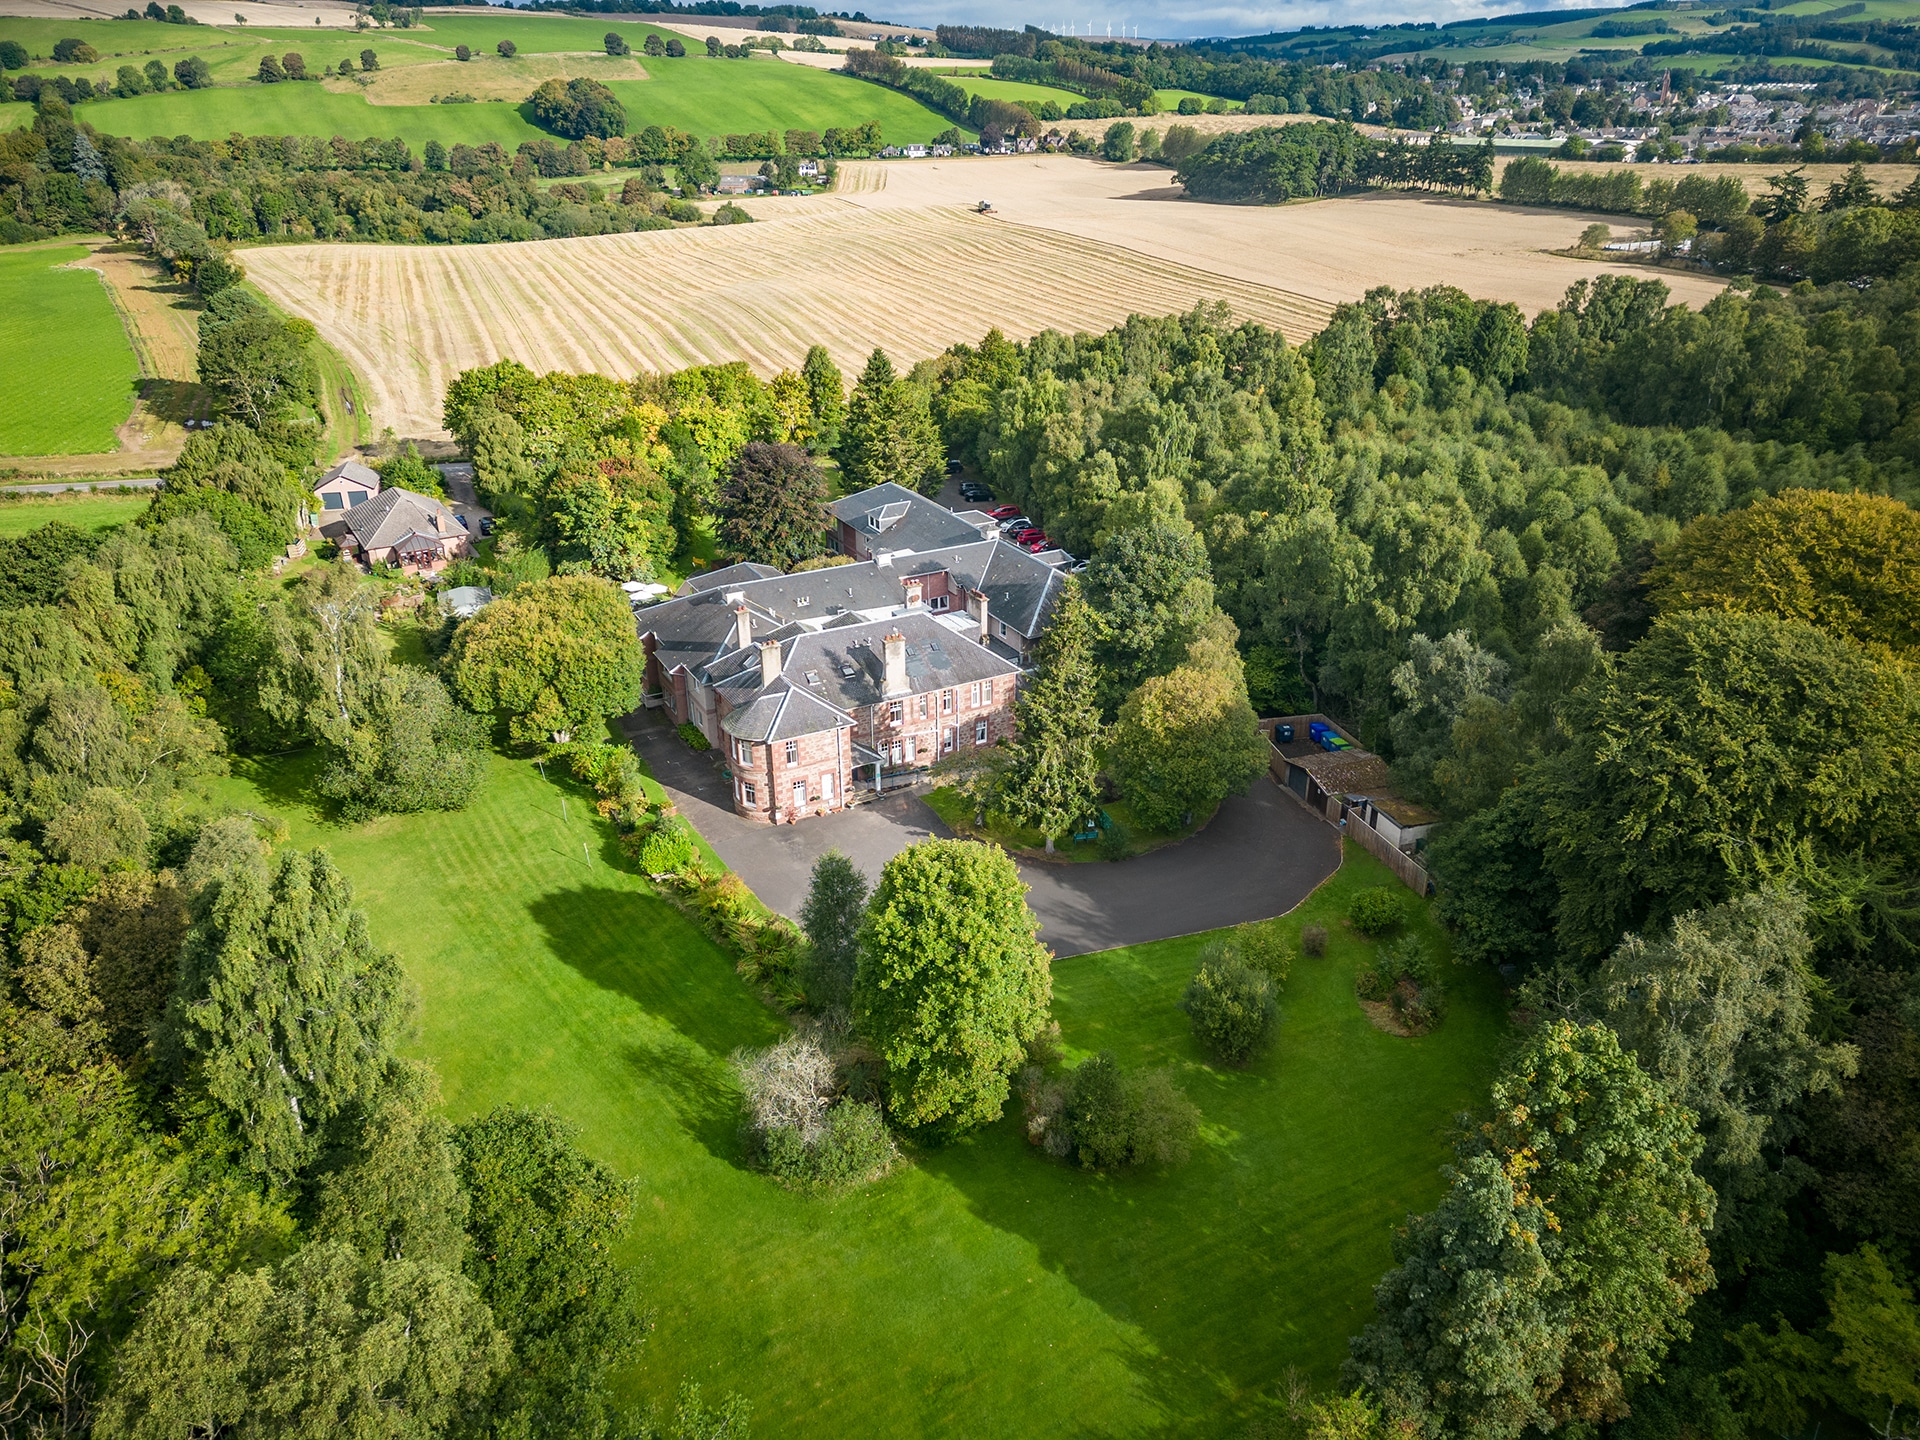 An aerial view of Muirton House Care Home in Blairgowrie and the surrounding countryside.